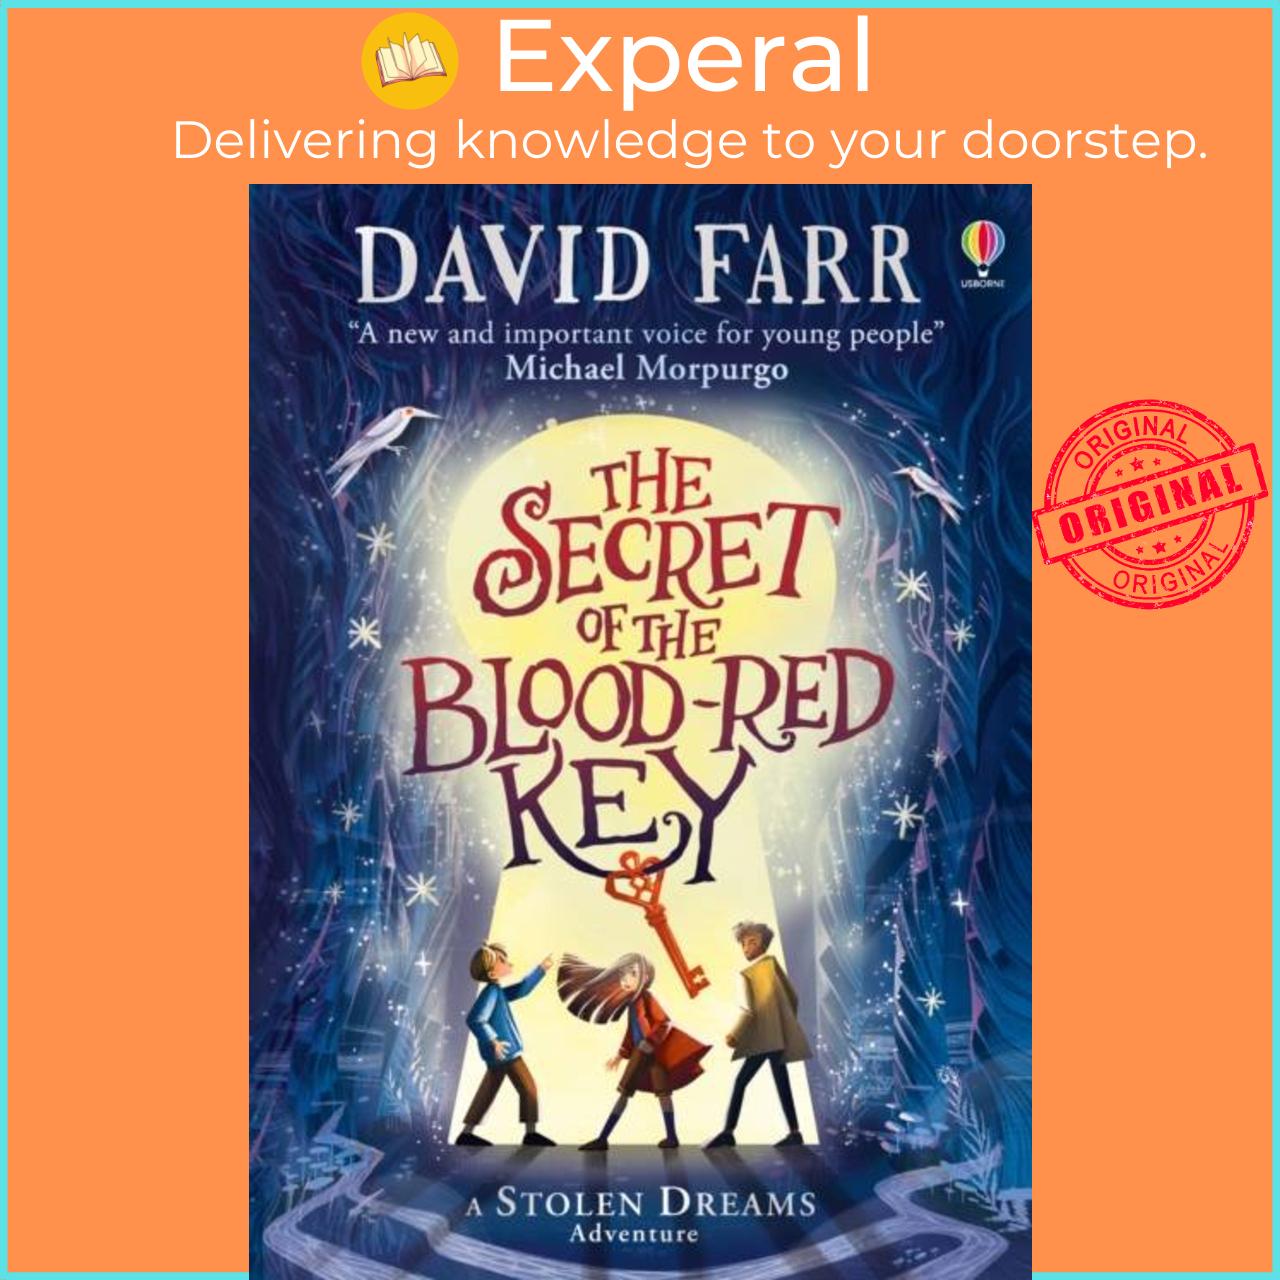 Sách - The Secret of the Blood-Red Key by David Farr (UK edition, hardcover)